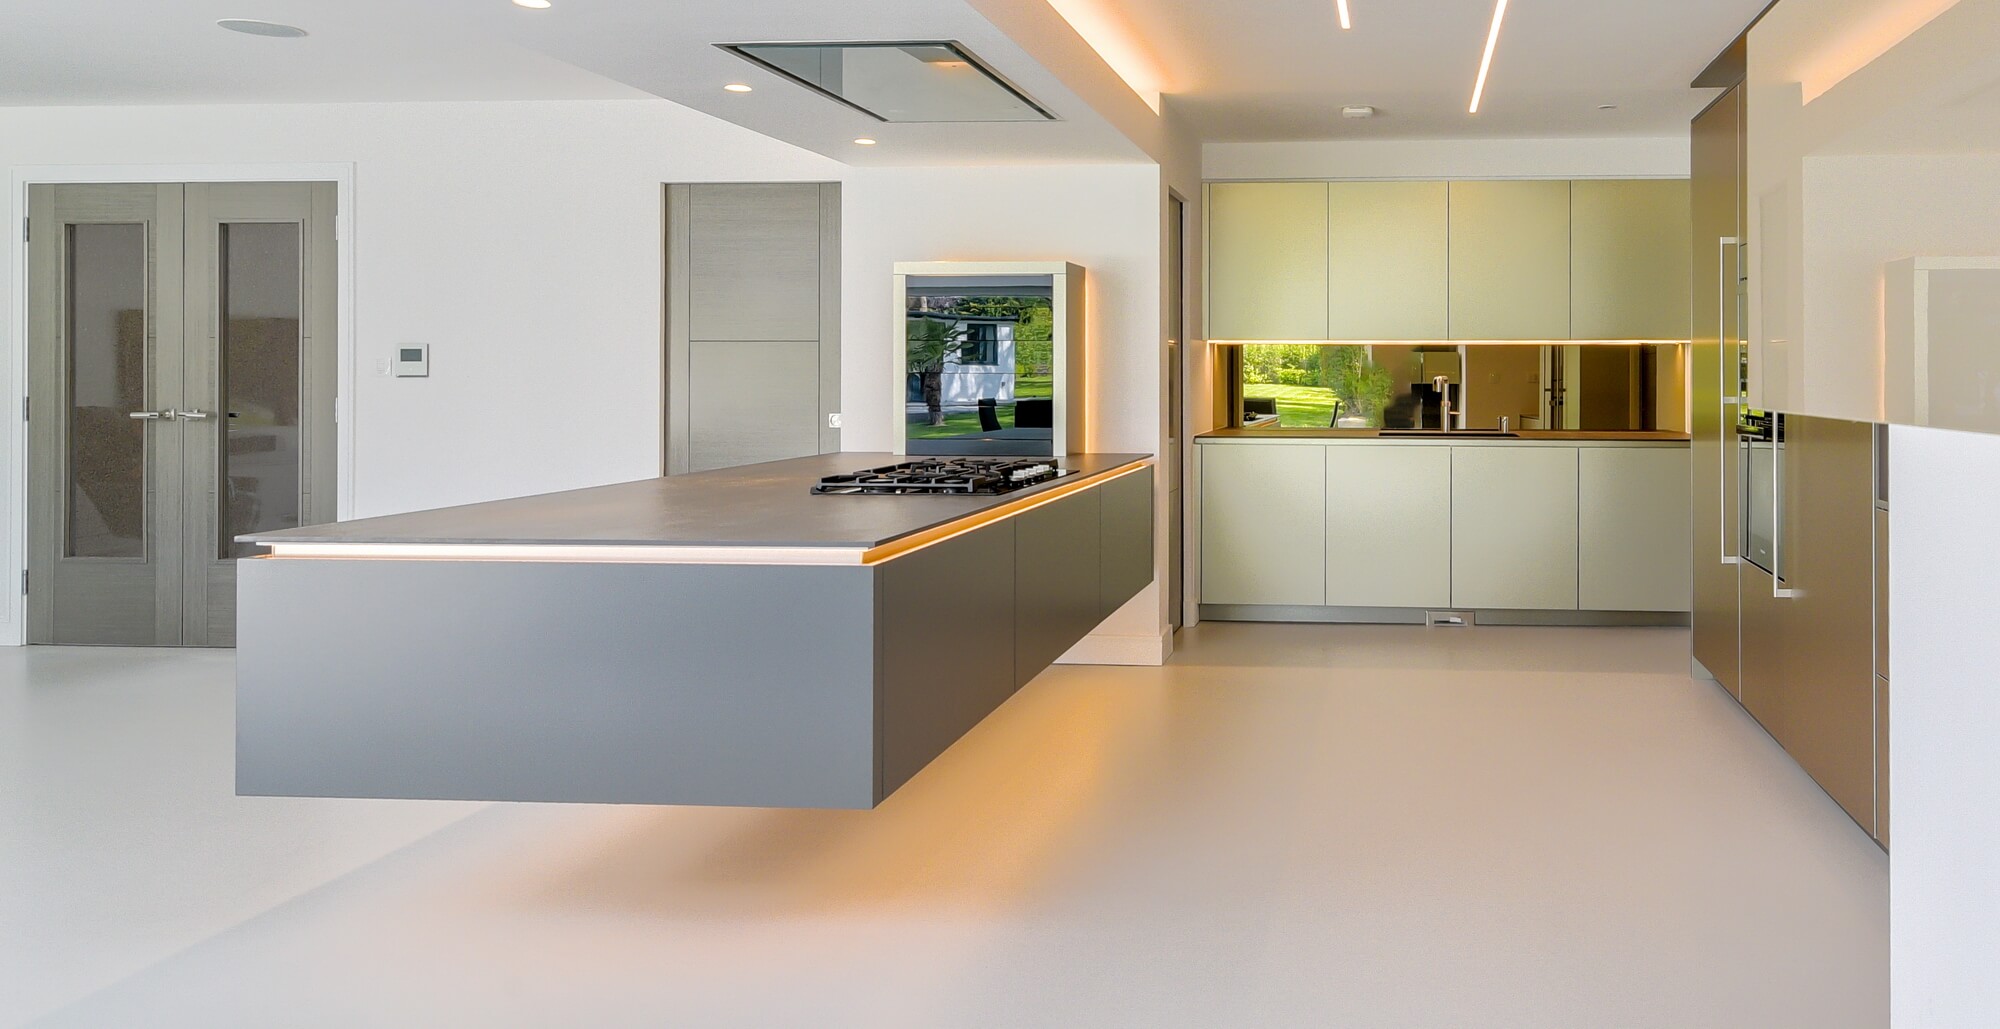 Floating Or Levitating Whatever You Call It This Kitchen Is